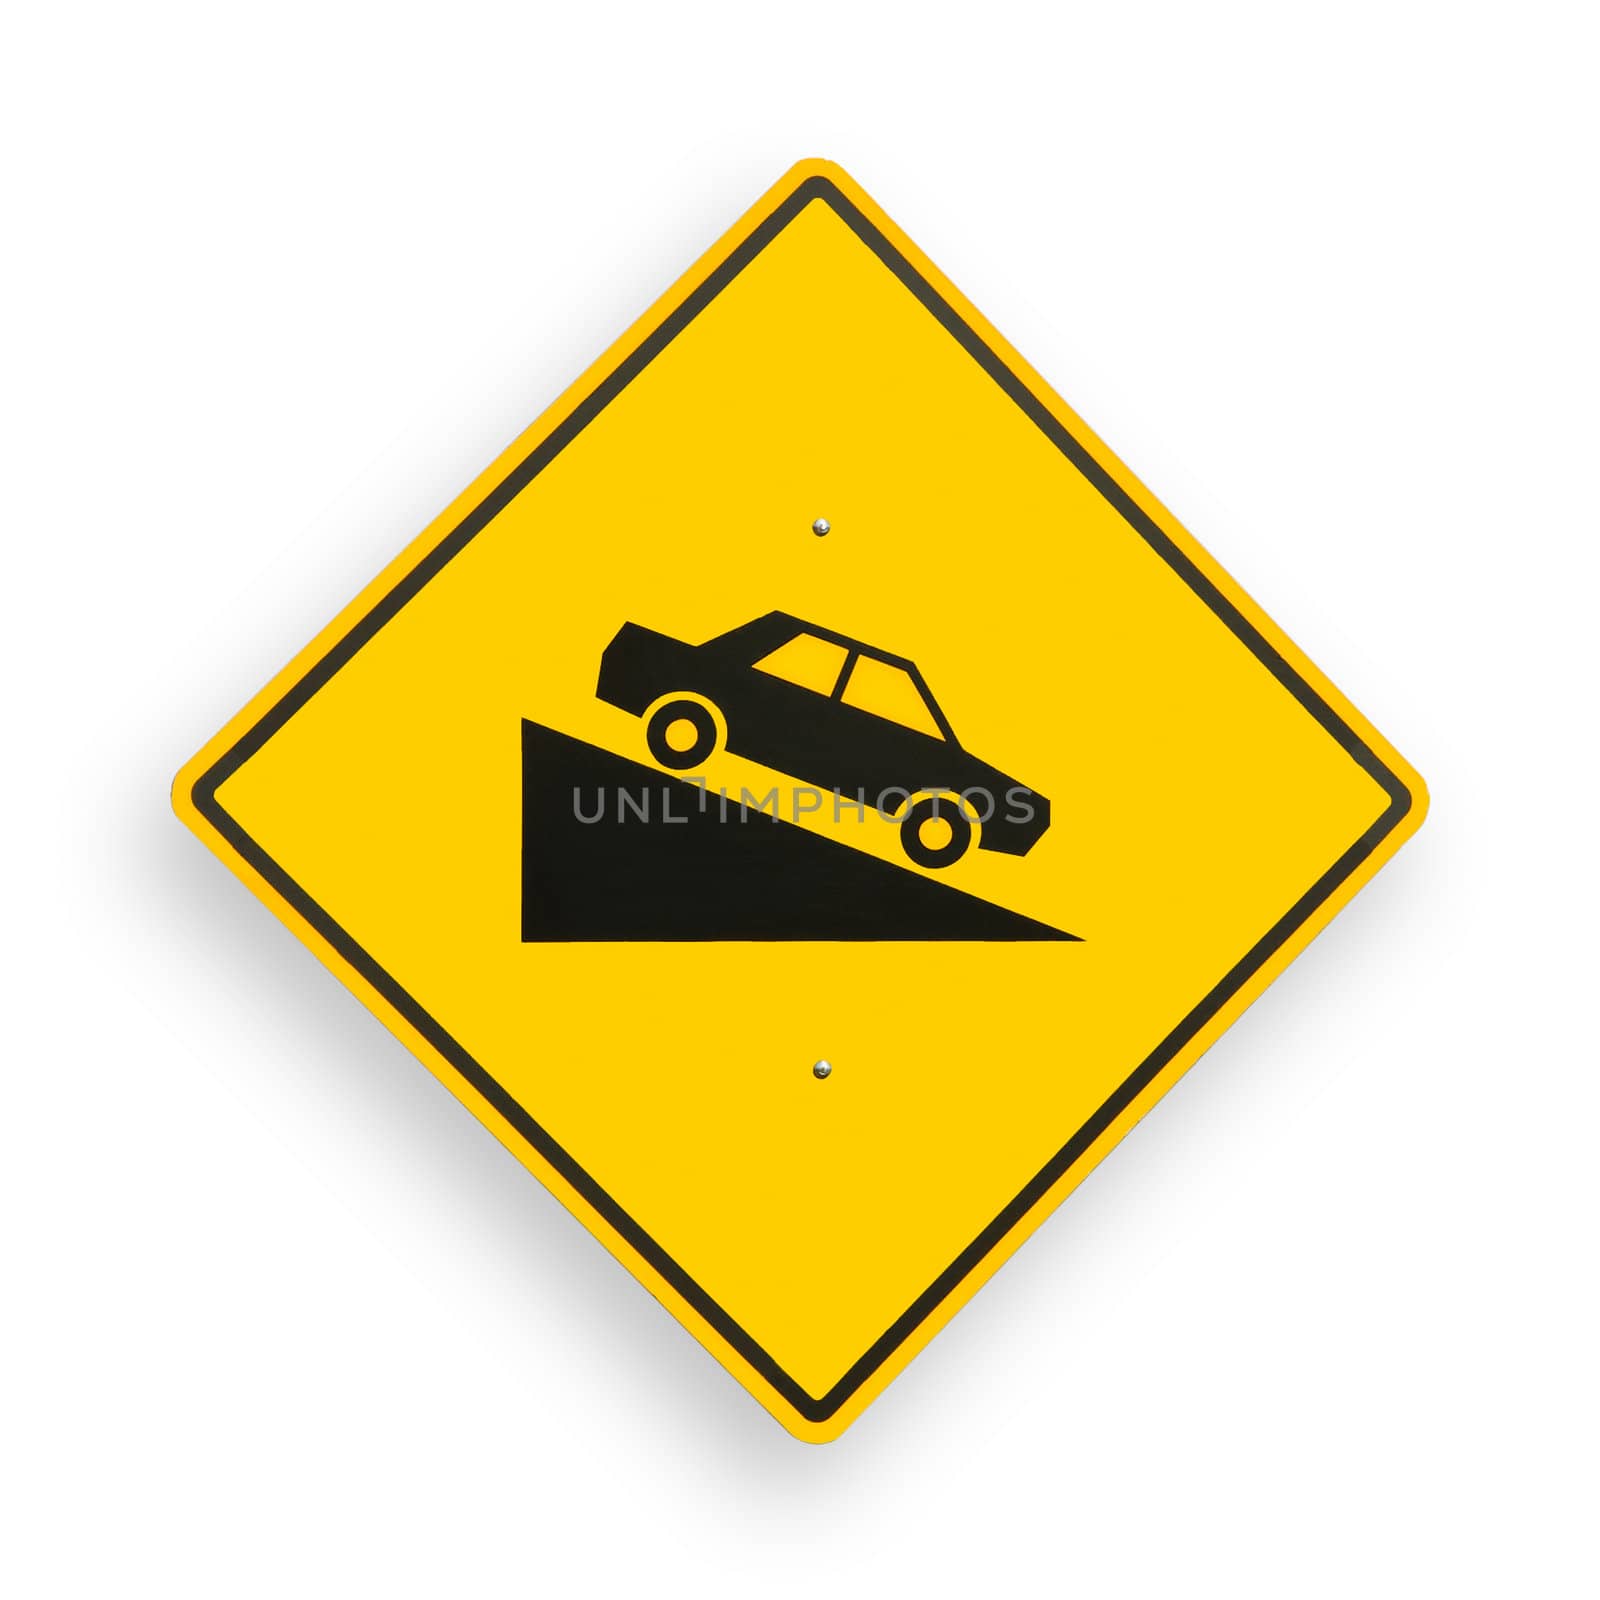 Traffic sign isolated on white, clipping path excludes shadow.